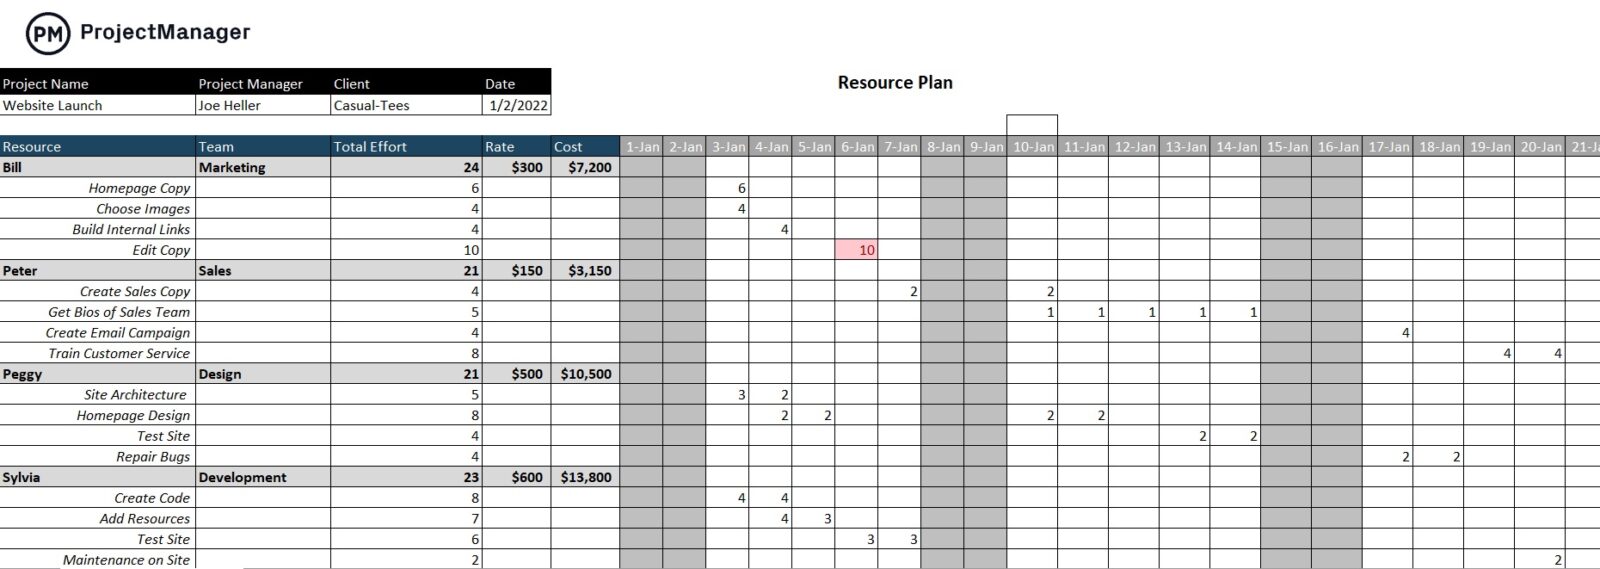 study timetable template excel